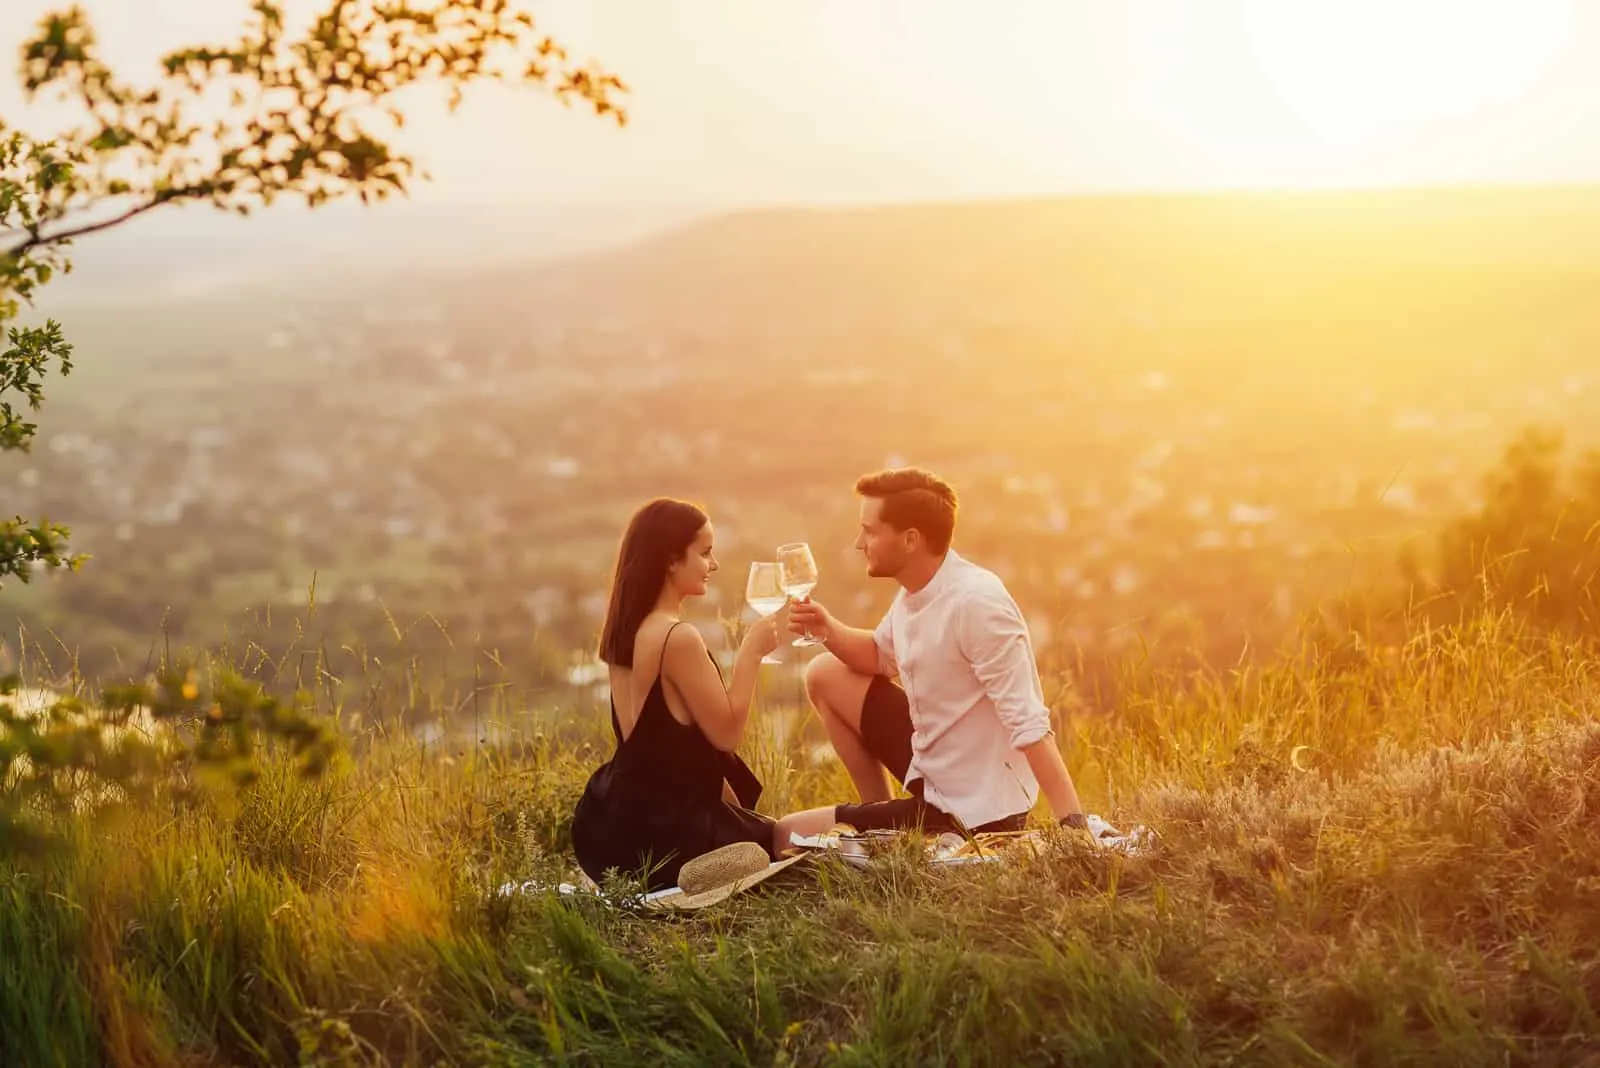 romantic picnic date on hill with view of city